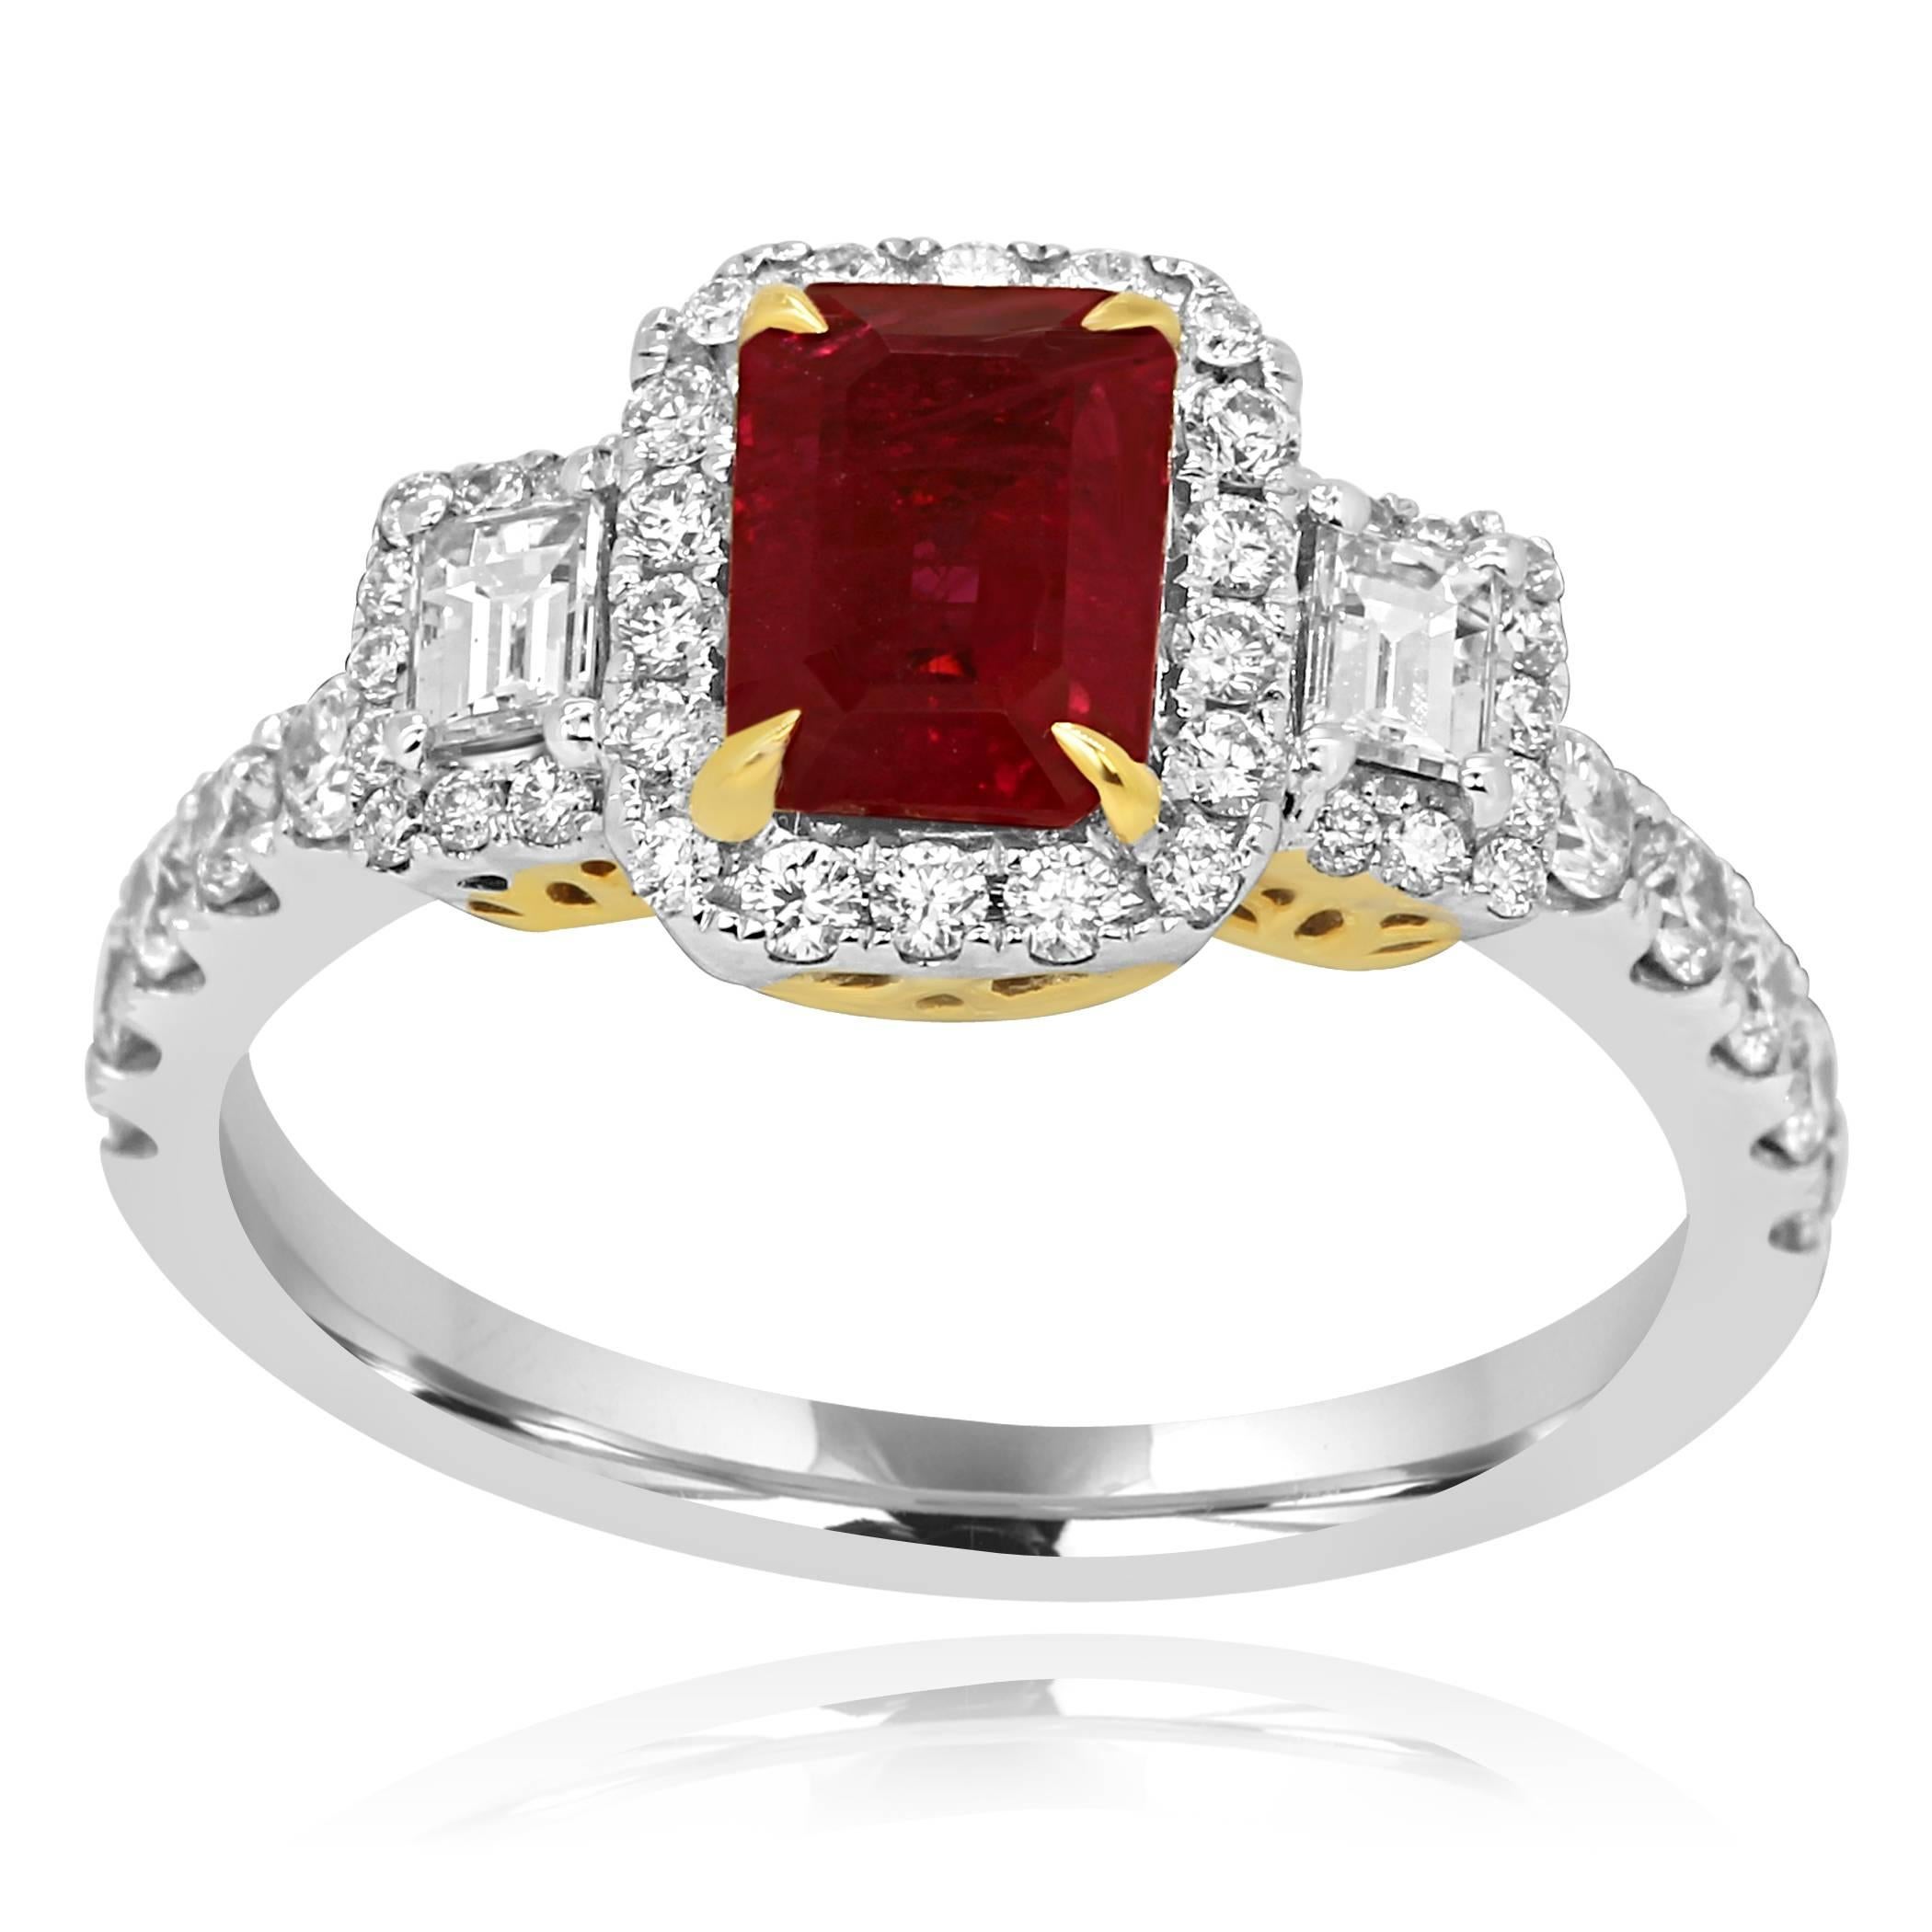 Stunning Ruby Emerald Cut 1.17 Carat Flanked with 2 White Diamond Baguette 0.21 Carat Encircled in a single Halo of White Round Diamonds 0.60 Carat in 18K White and Yellow Gold Bridal Fashion Ring.

Style available in different price ranges. Prices